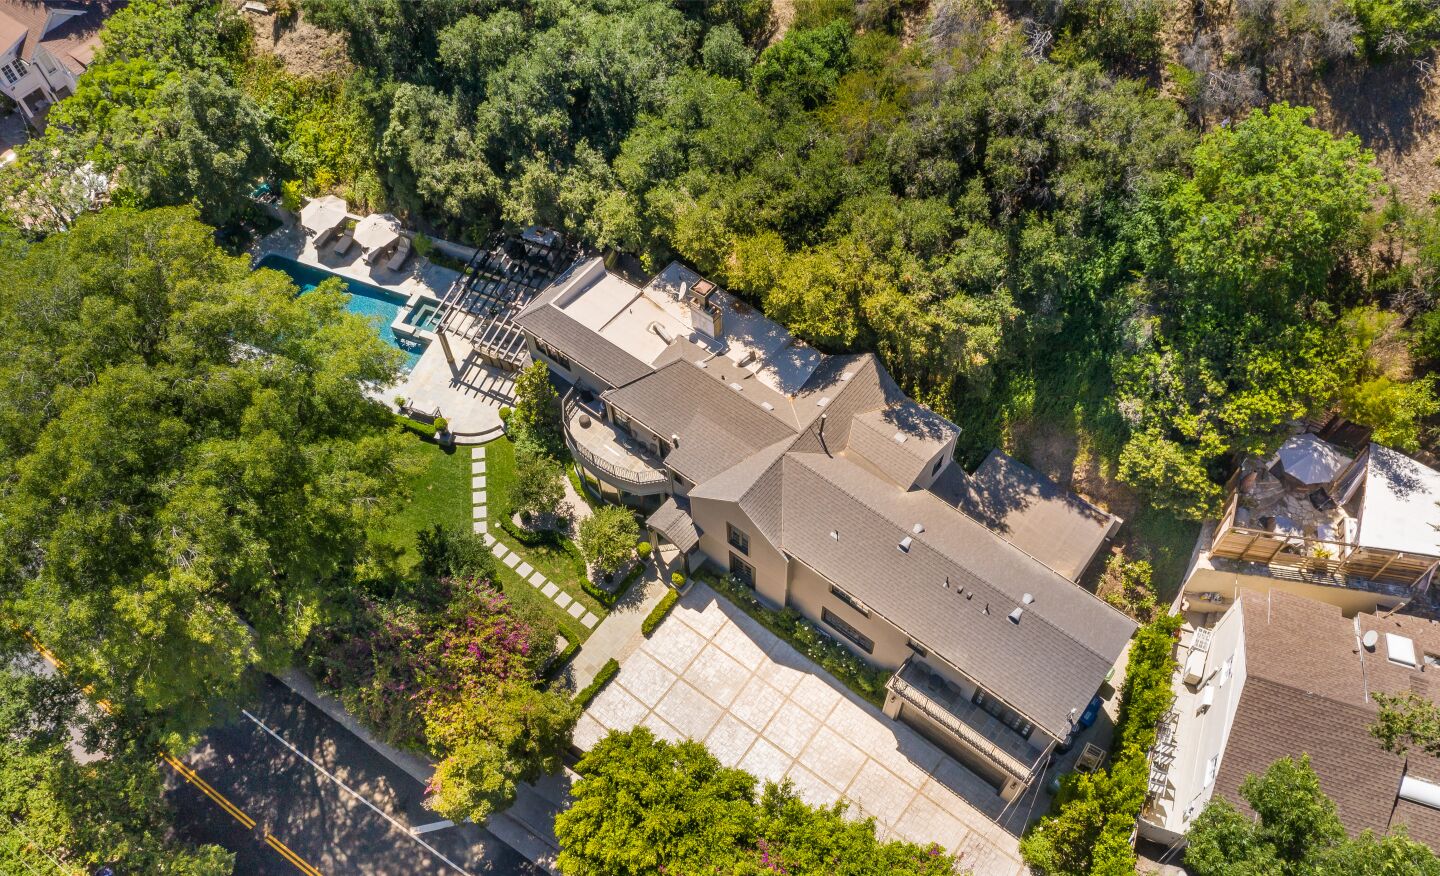 An aerial view of the two-story home.